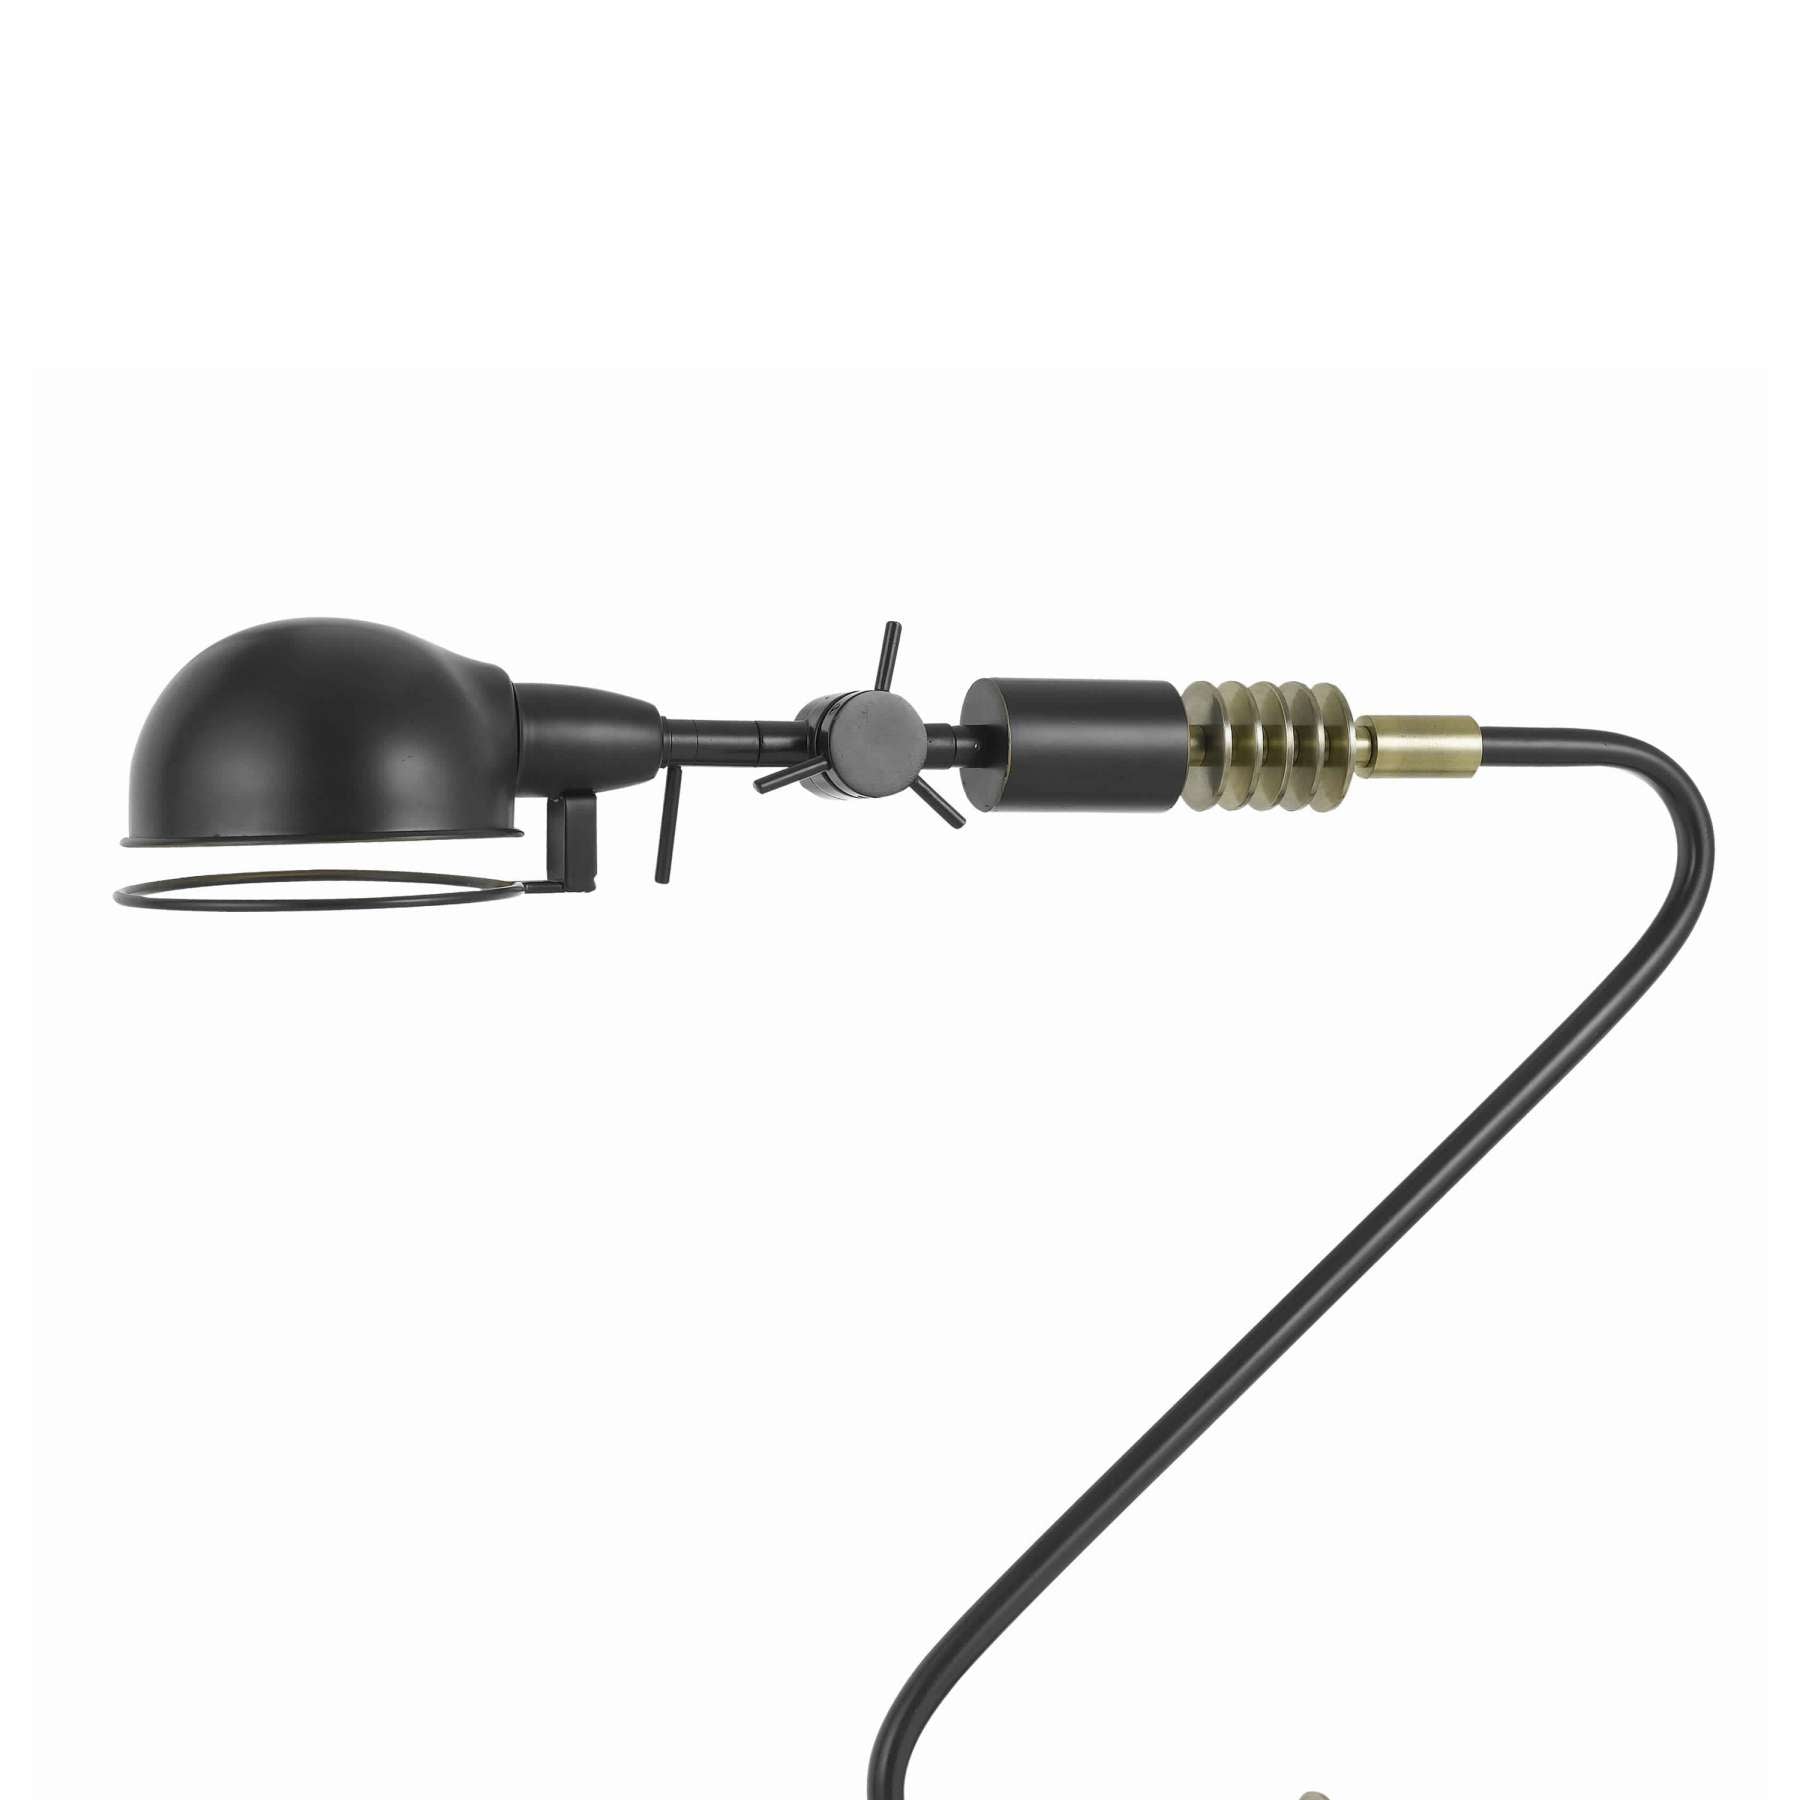 Adjustable Head Metal Desk Lamp With Curved Design Tubular Stand, Black By Benzara